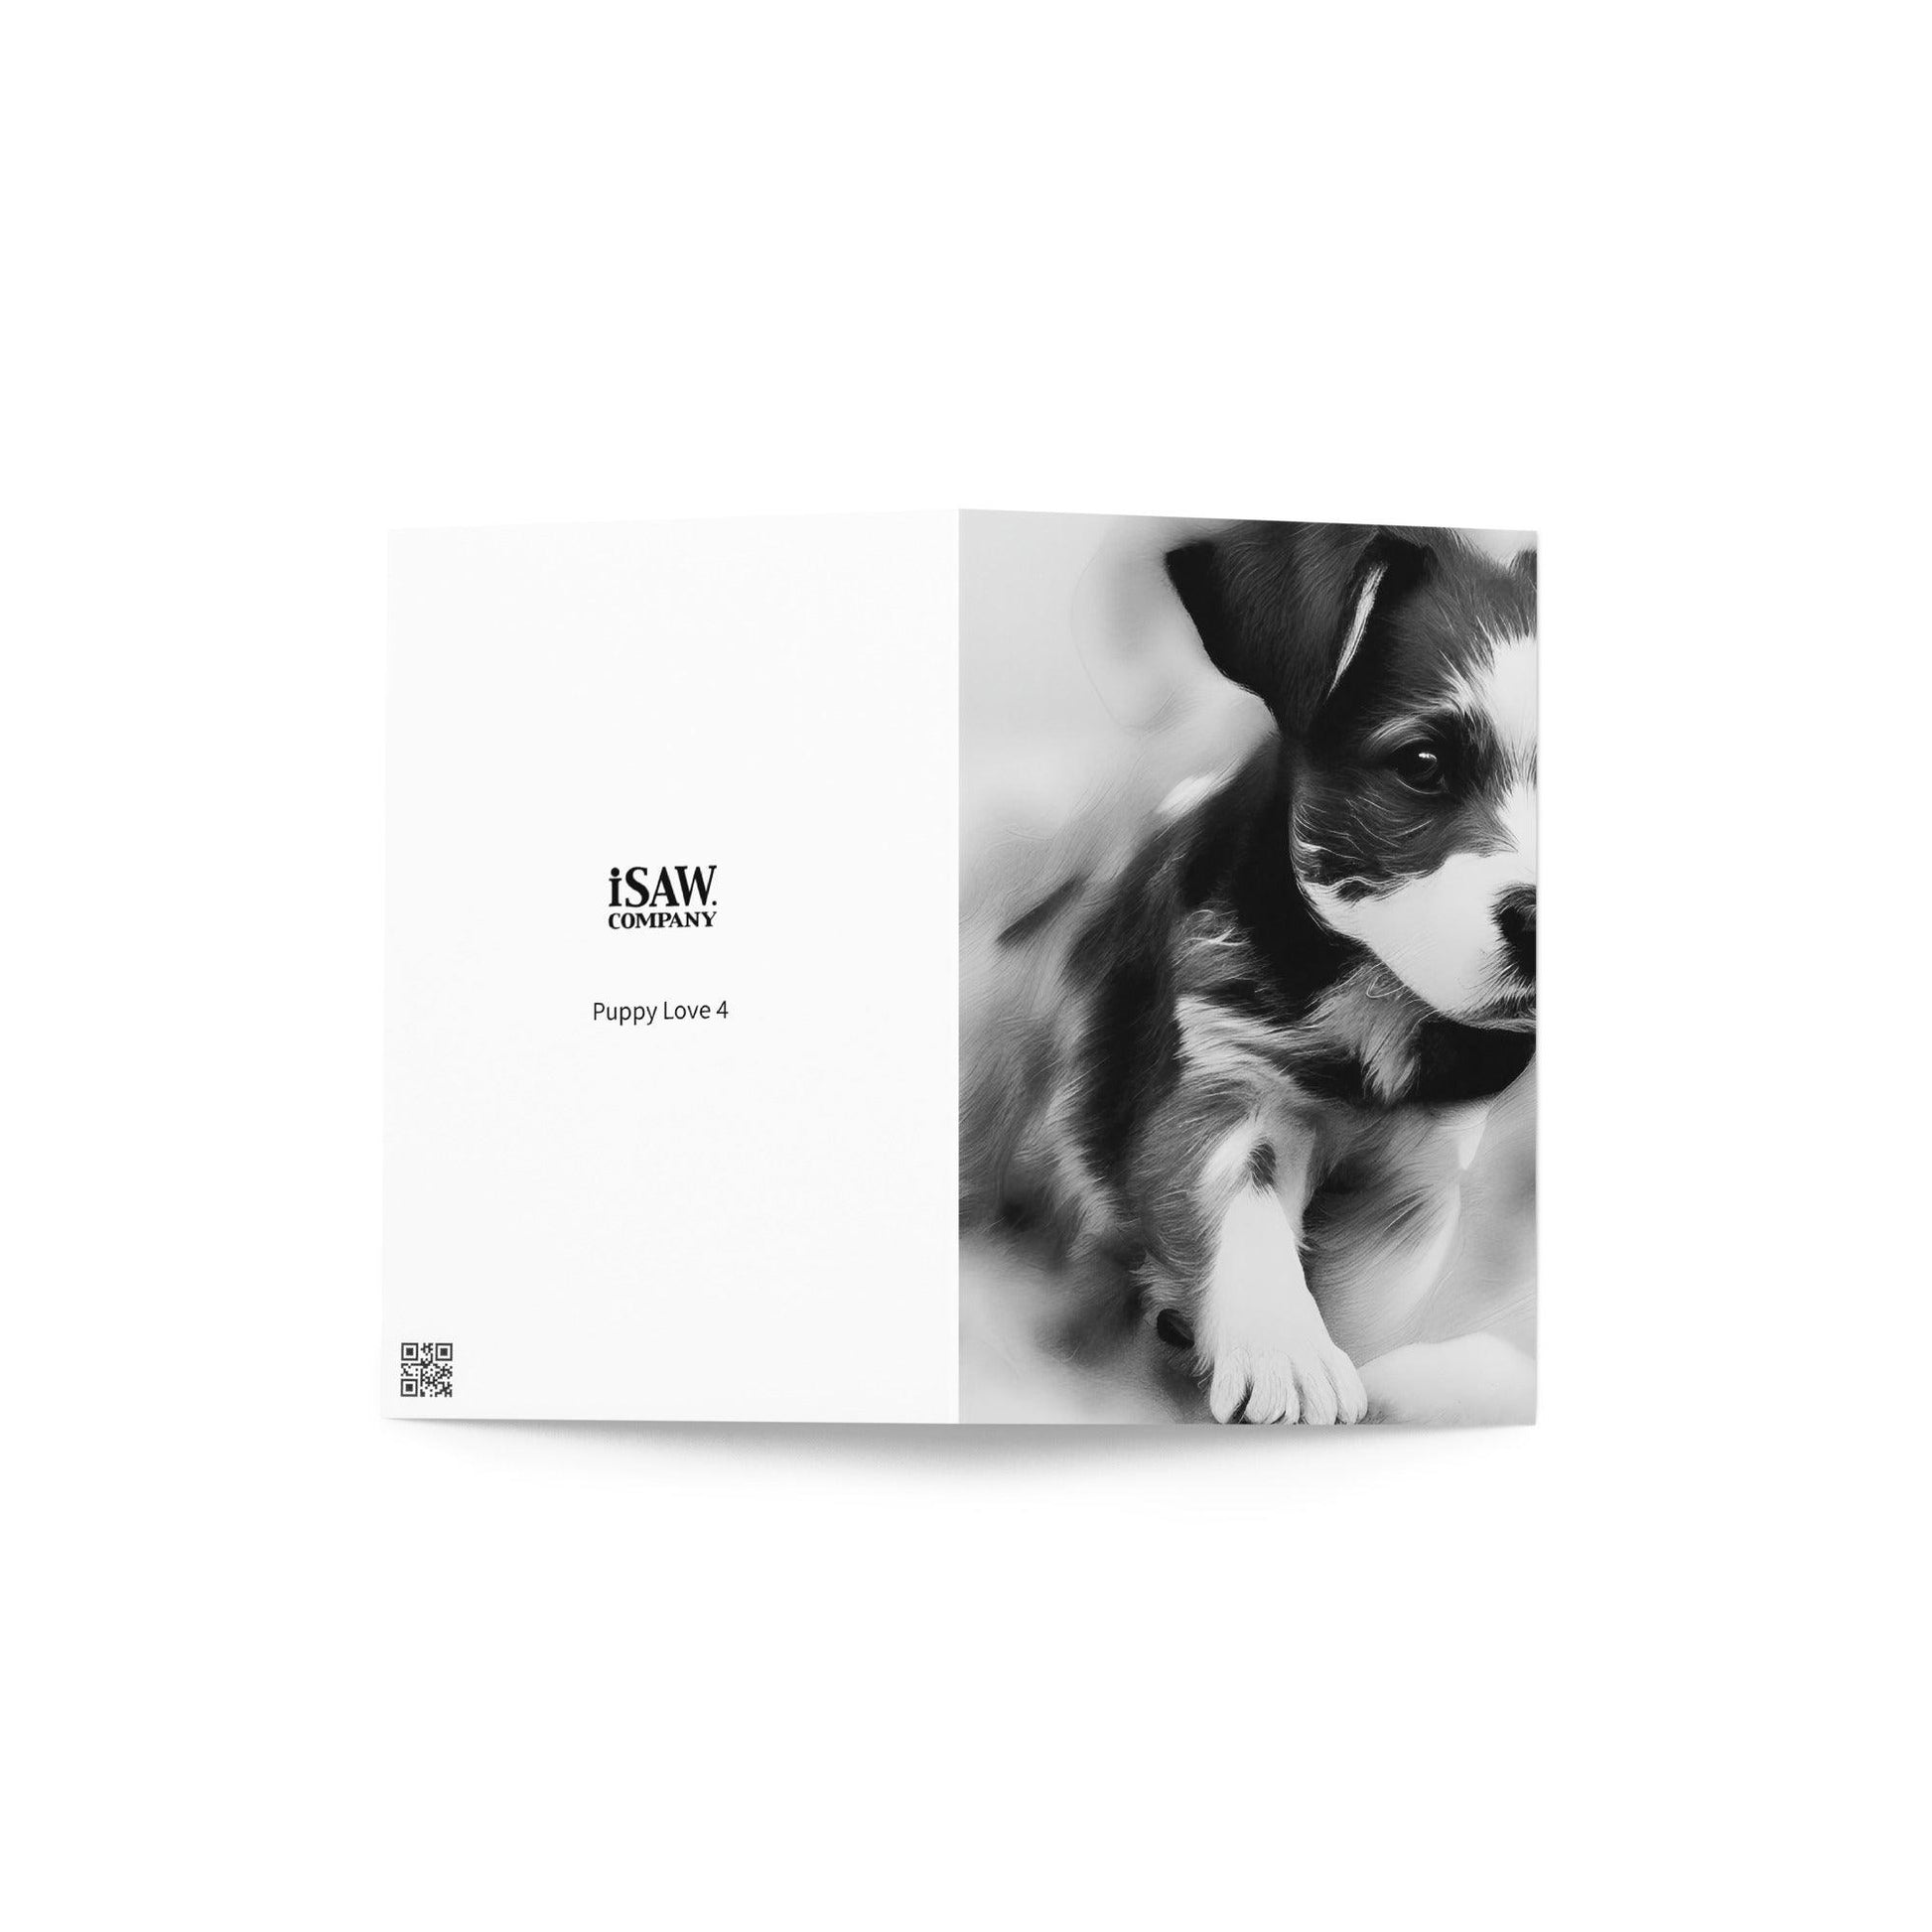 Puppy Love 4 - Note Card - iSAW Company